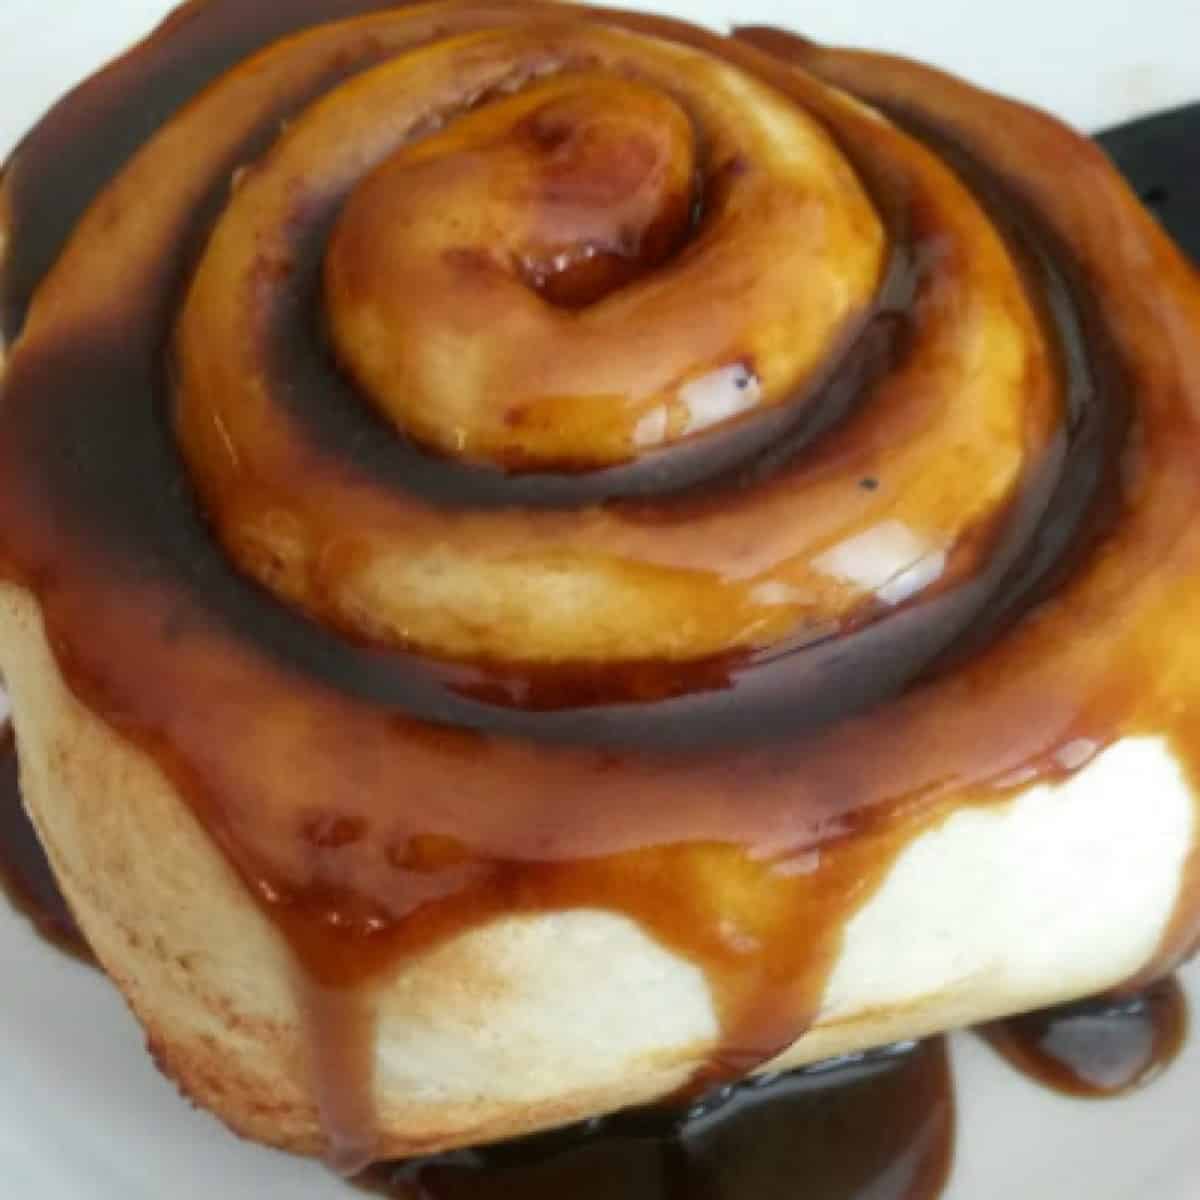 homemade caramel sauce made with coconut sugar drizzled on a cinnamon roll